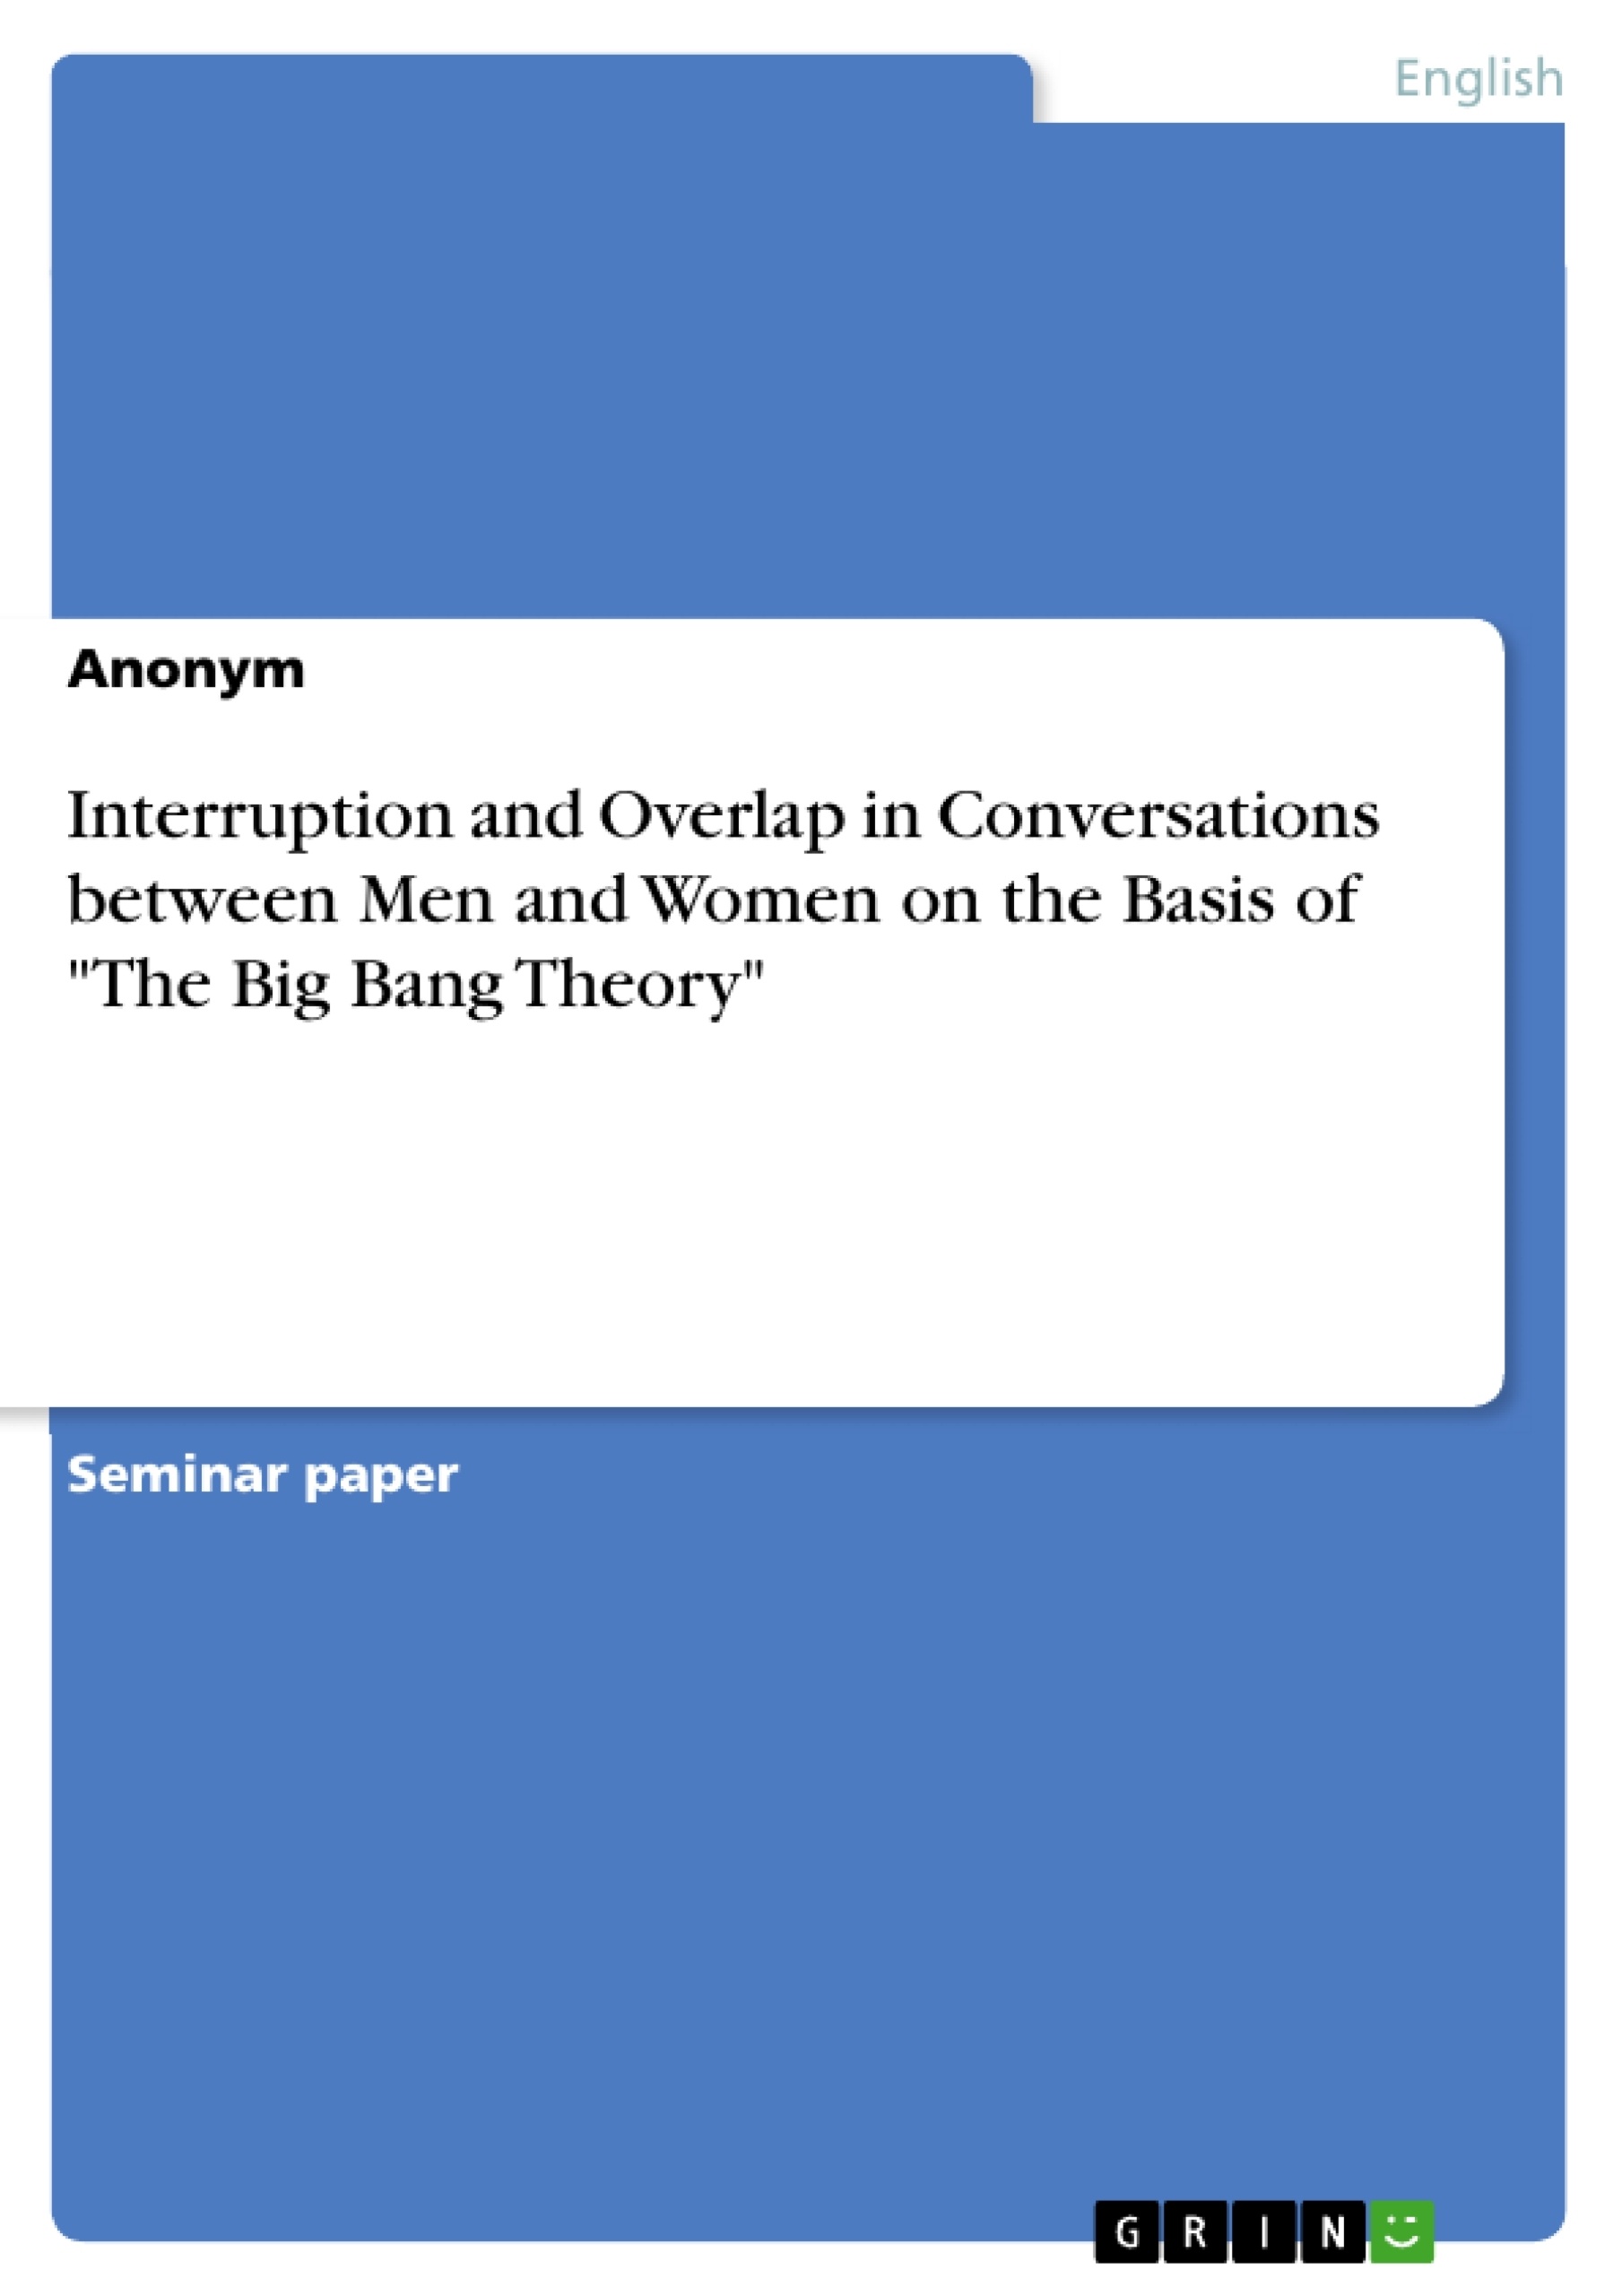 Title: Interruption and Overlap in Conversations between Men and Women on the Basis of "The Big Bang Theory"